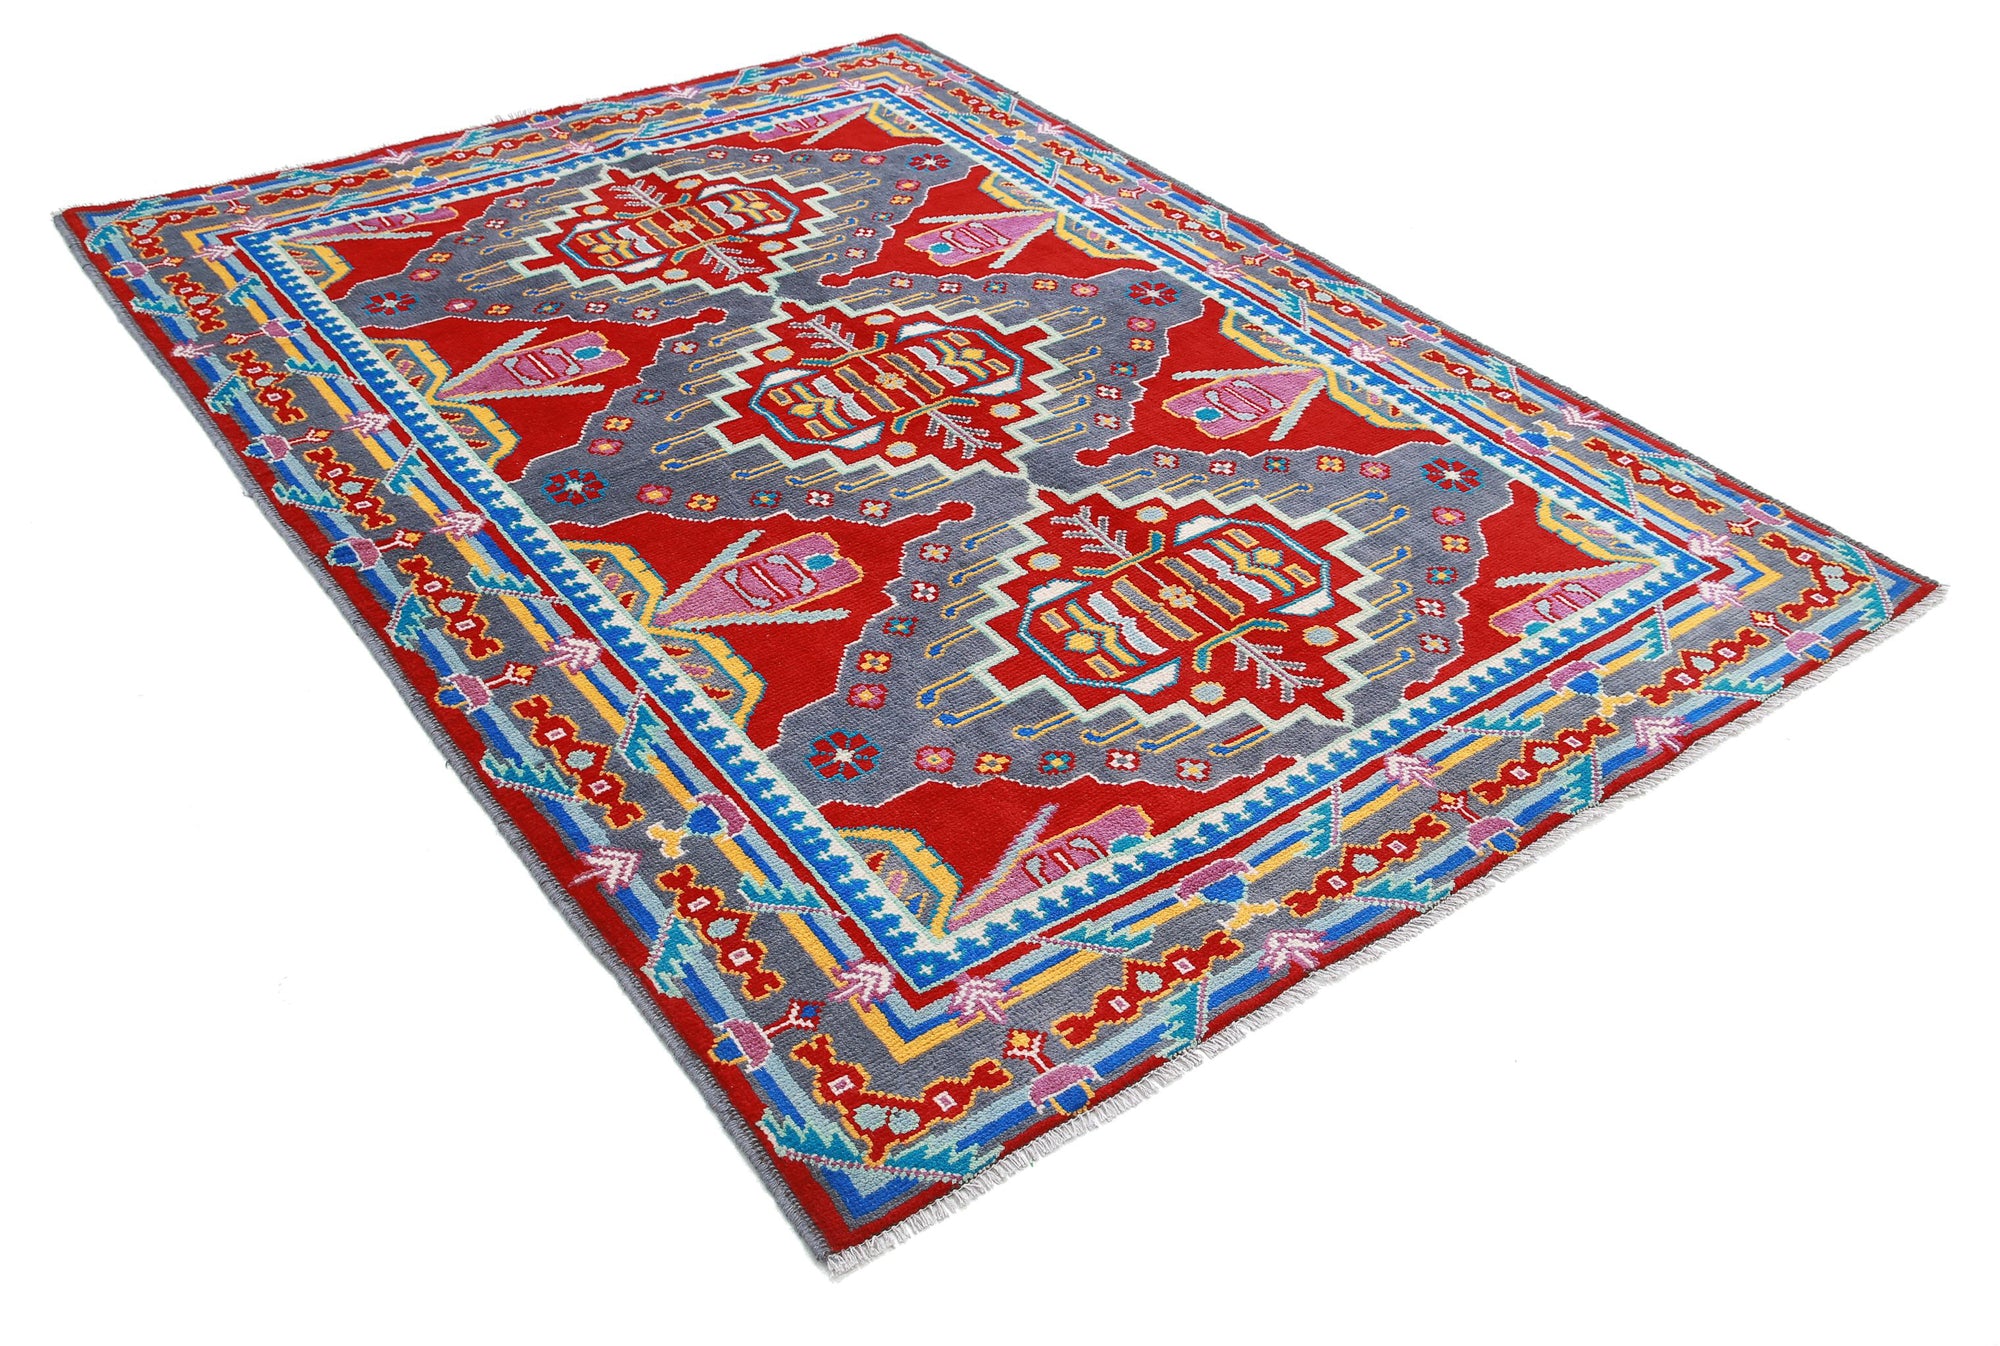 Revival-hand-knotted-qarghani-wool-rug-5014224-1.jpg